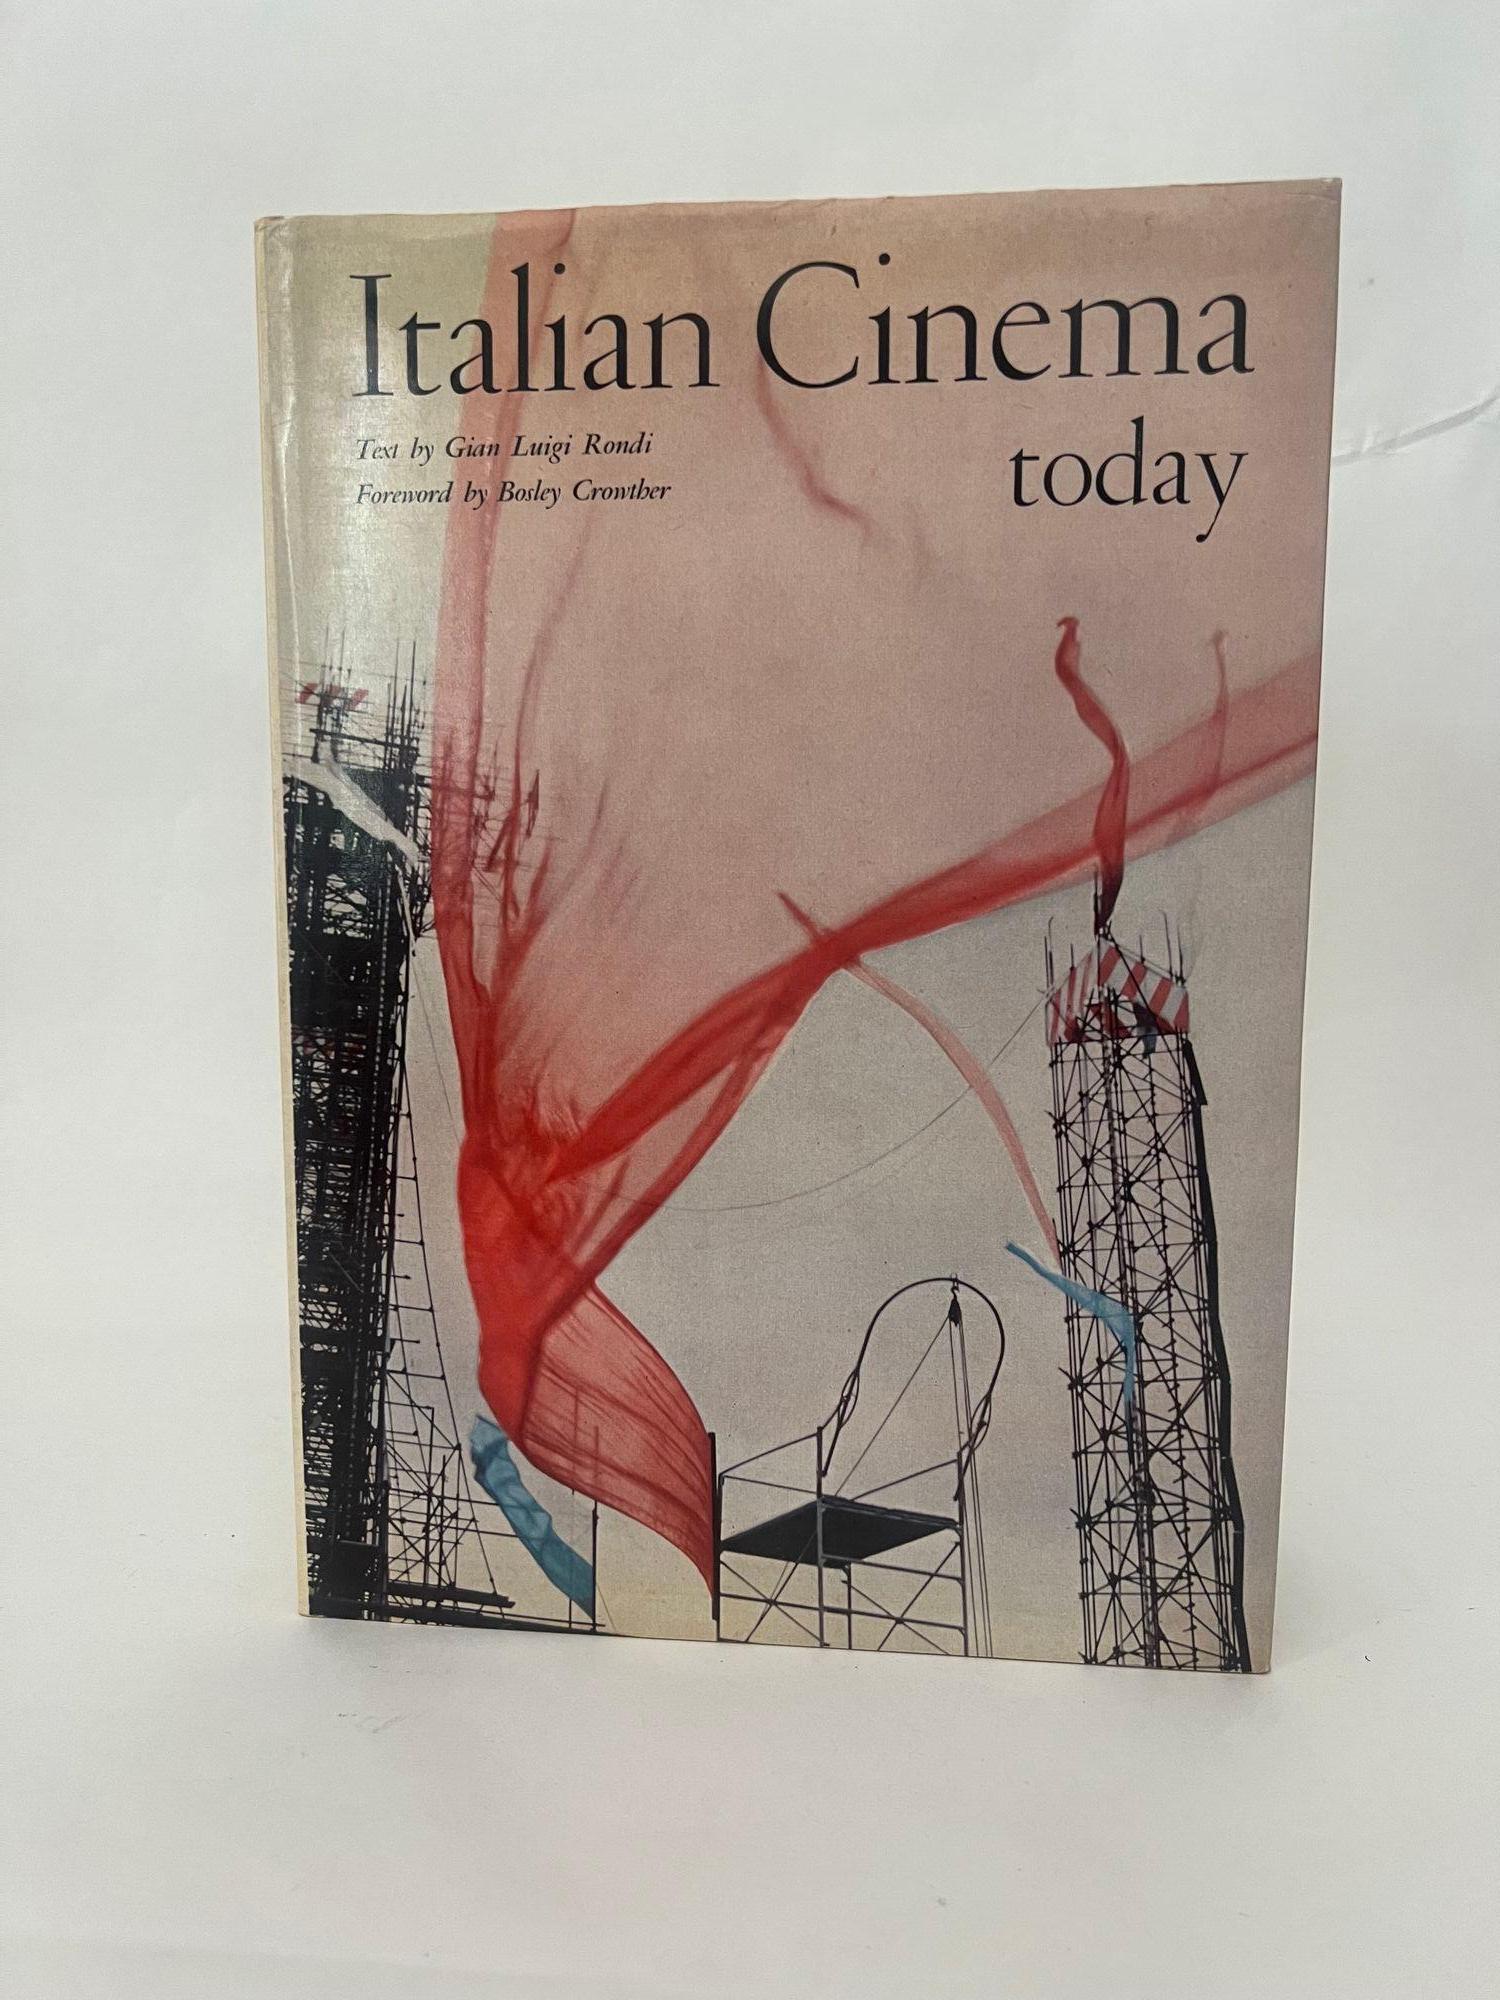 1966 Italian Cinema Today by  Rondi Gian Luigi First Edition.
Collectible rare 1st Edition large hardcover book.
Printed in Italy, first edition of « Italian cinema today » written by Rondi, Gian Luigi, Text By Foreword By Bosley Crowther.
A Fine,